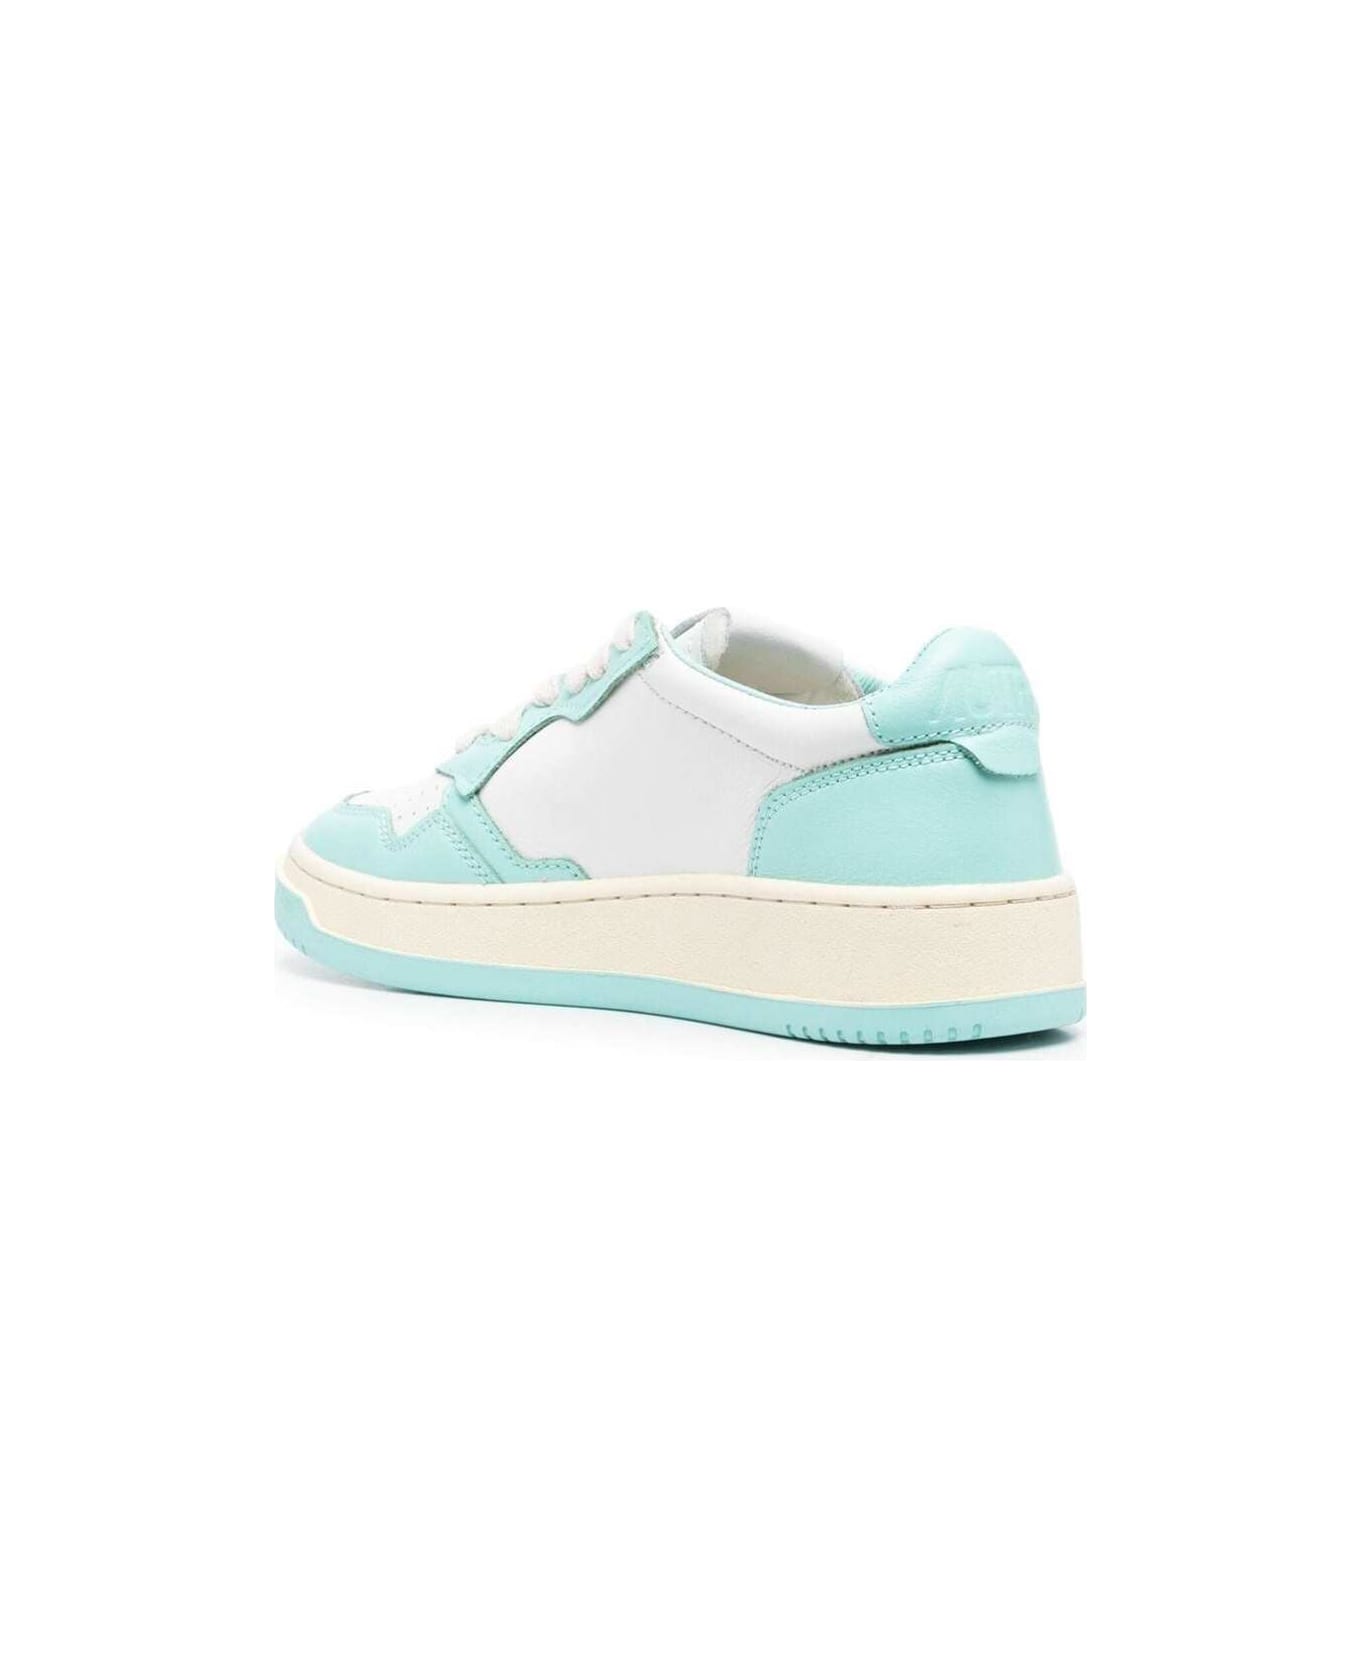 Autry Medalist Lace-up Sneakers - Leat Turquoise スニーカー